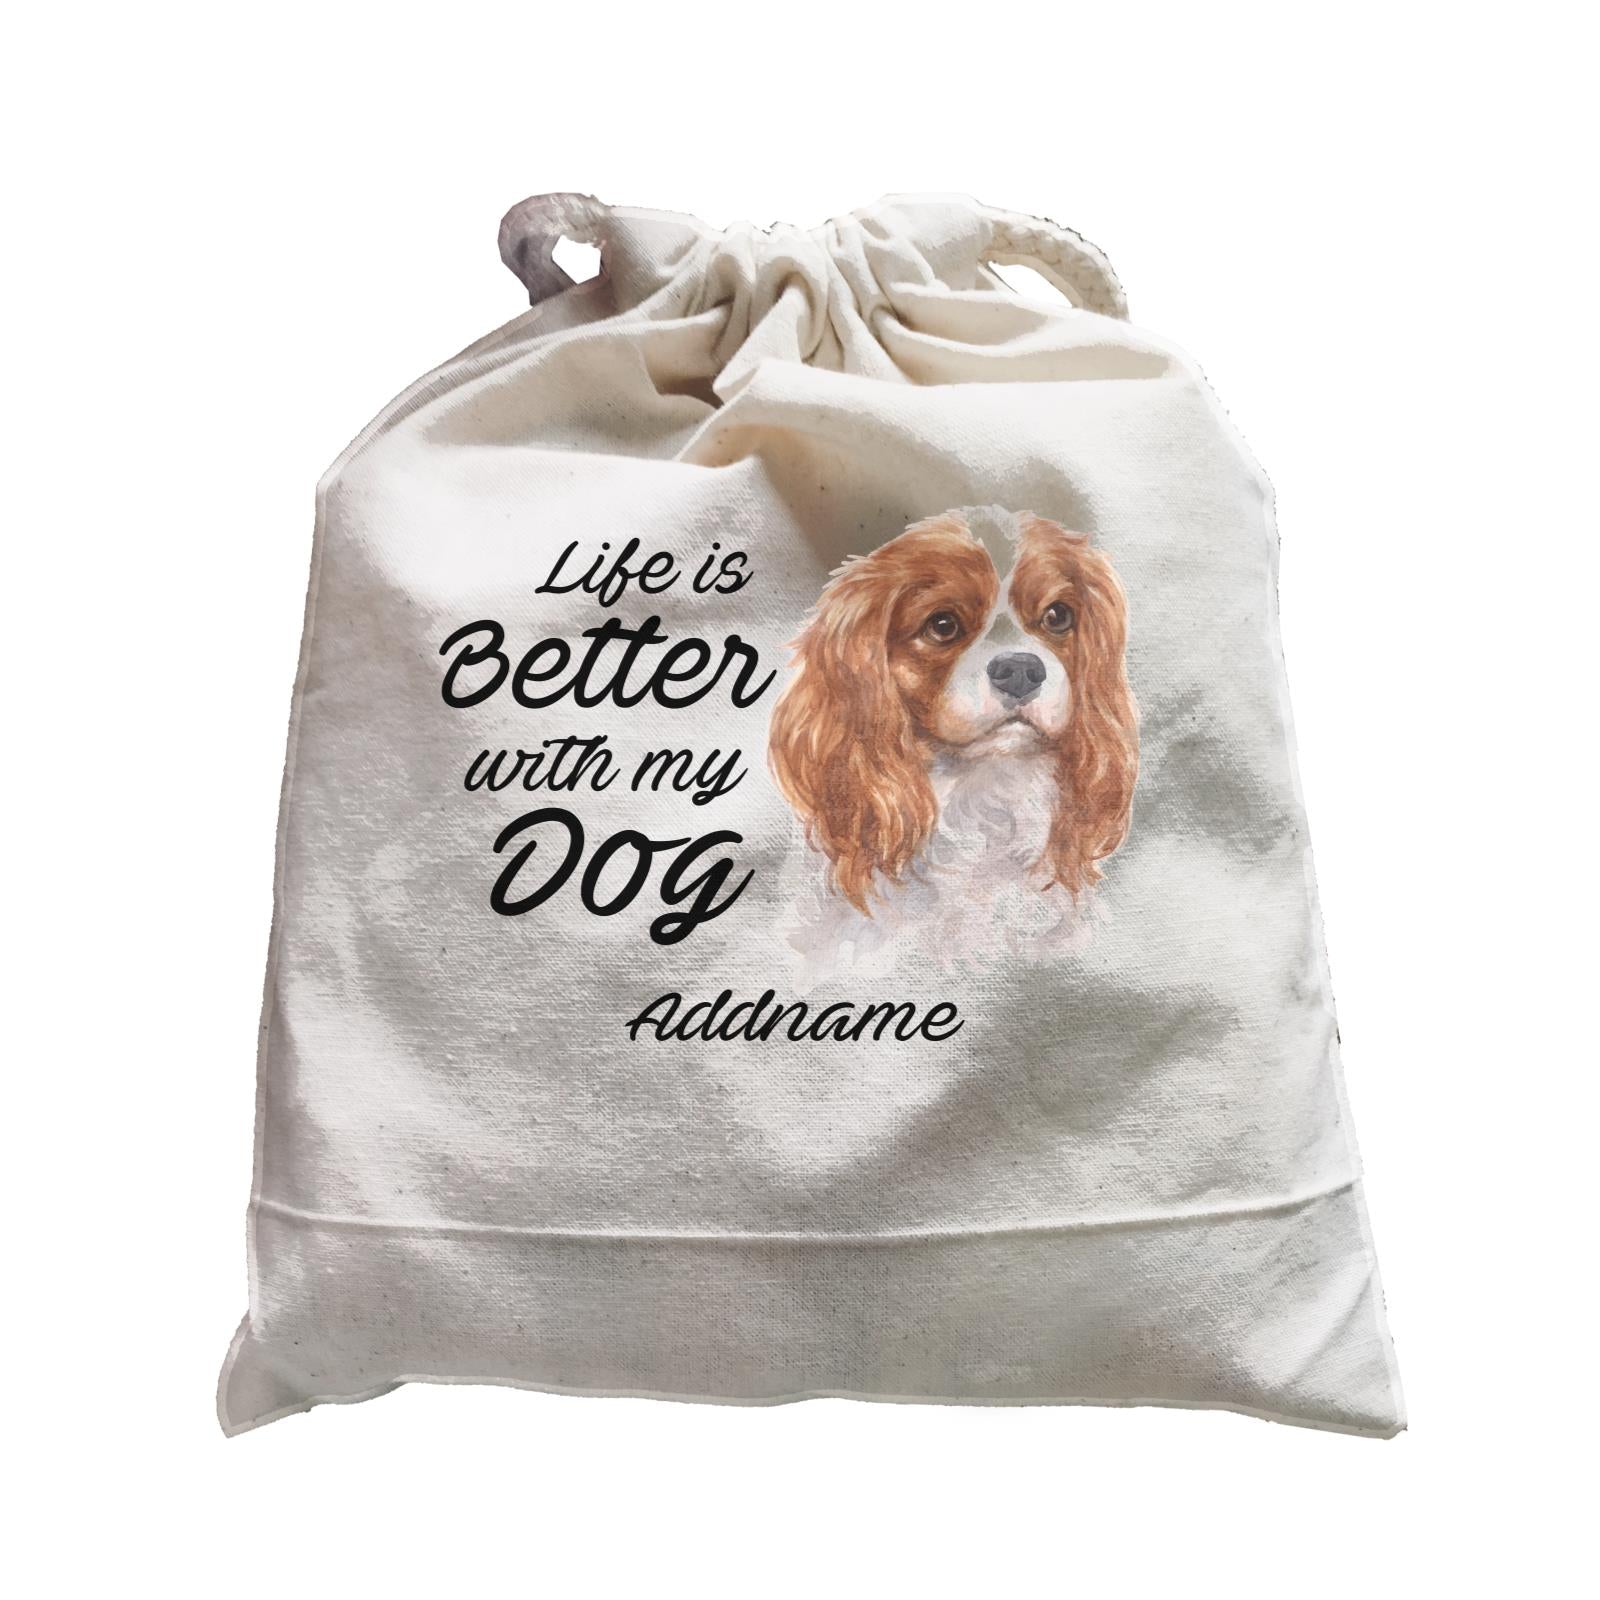 Watercolor Life is Better With My Dog King Charles Spaniel Addname Satchel